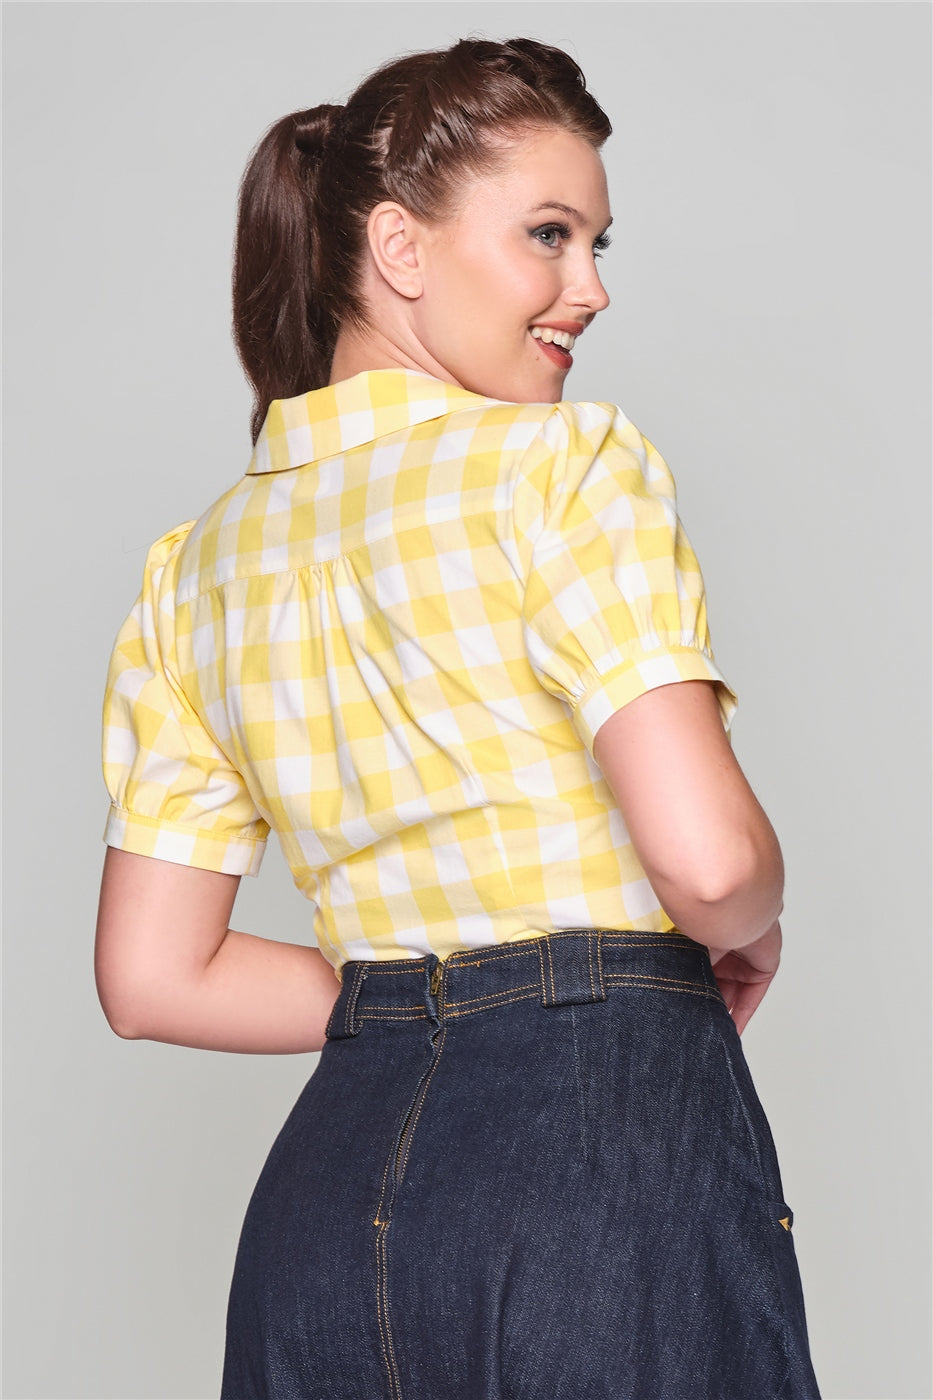 Happy, smiling girl looking over her shoulder with her hair tied back in a ponytail. She is wearing a denim skirt and yellow gingham short sleeved blouse. 